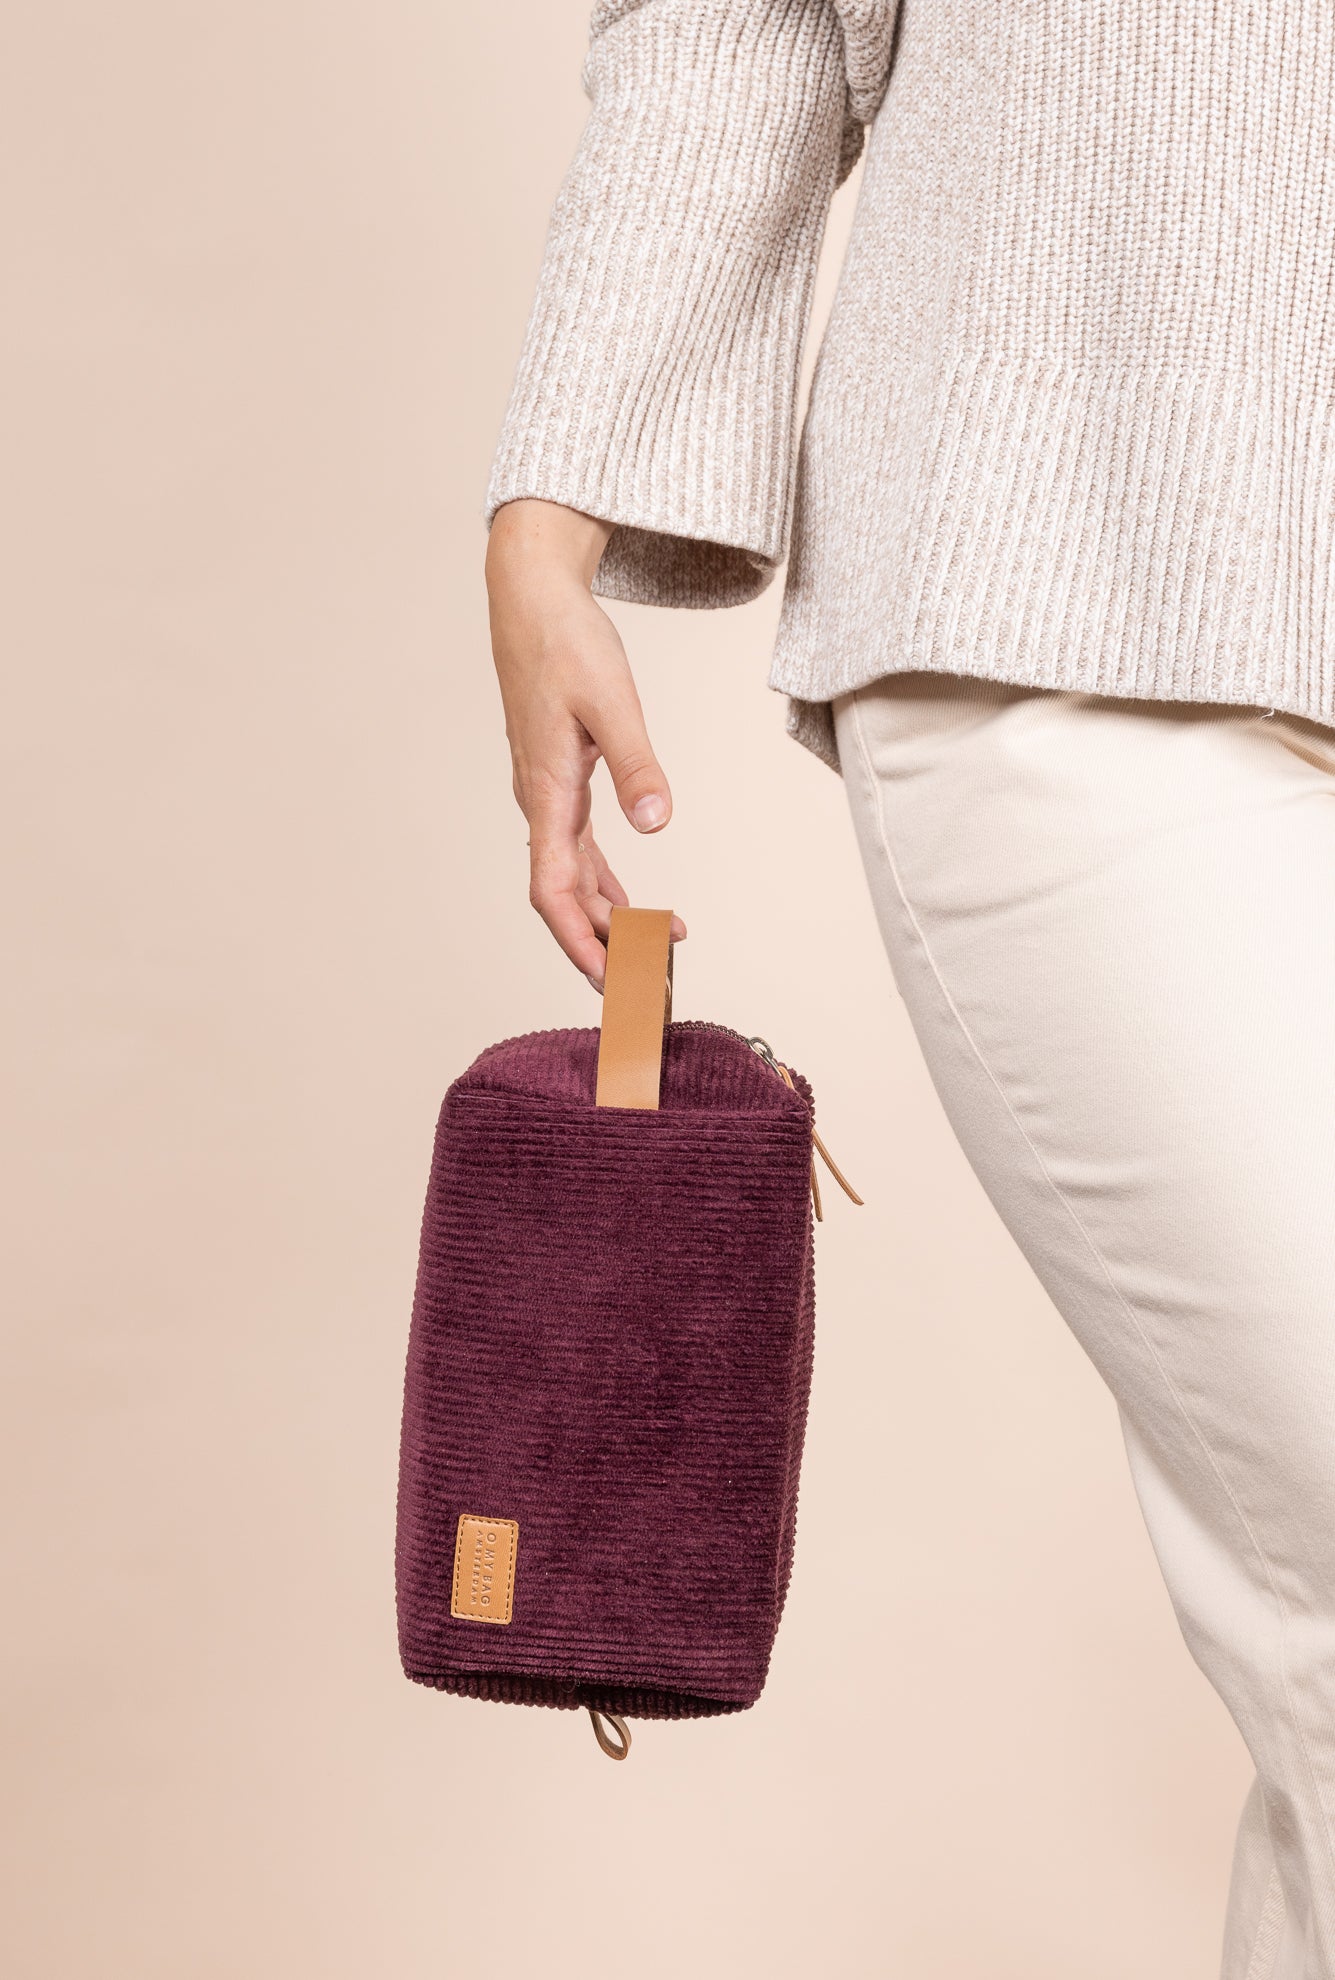 Model holding Ted Travel Case Large in Corduroy